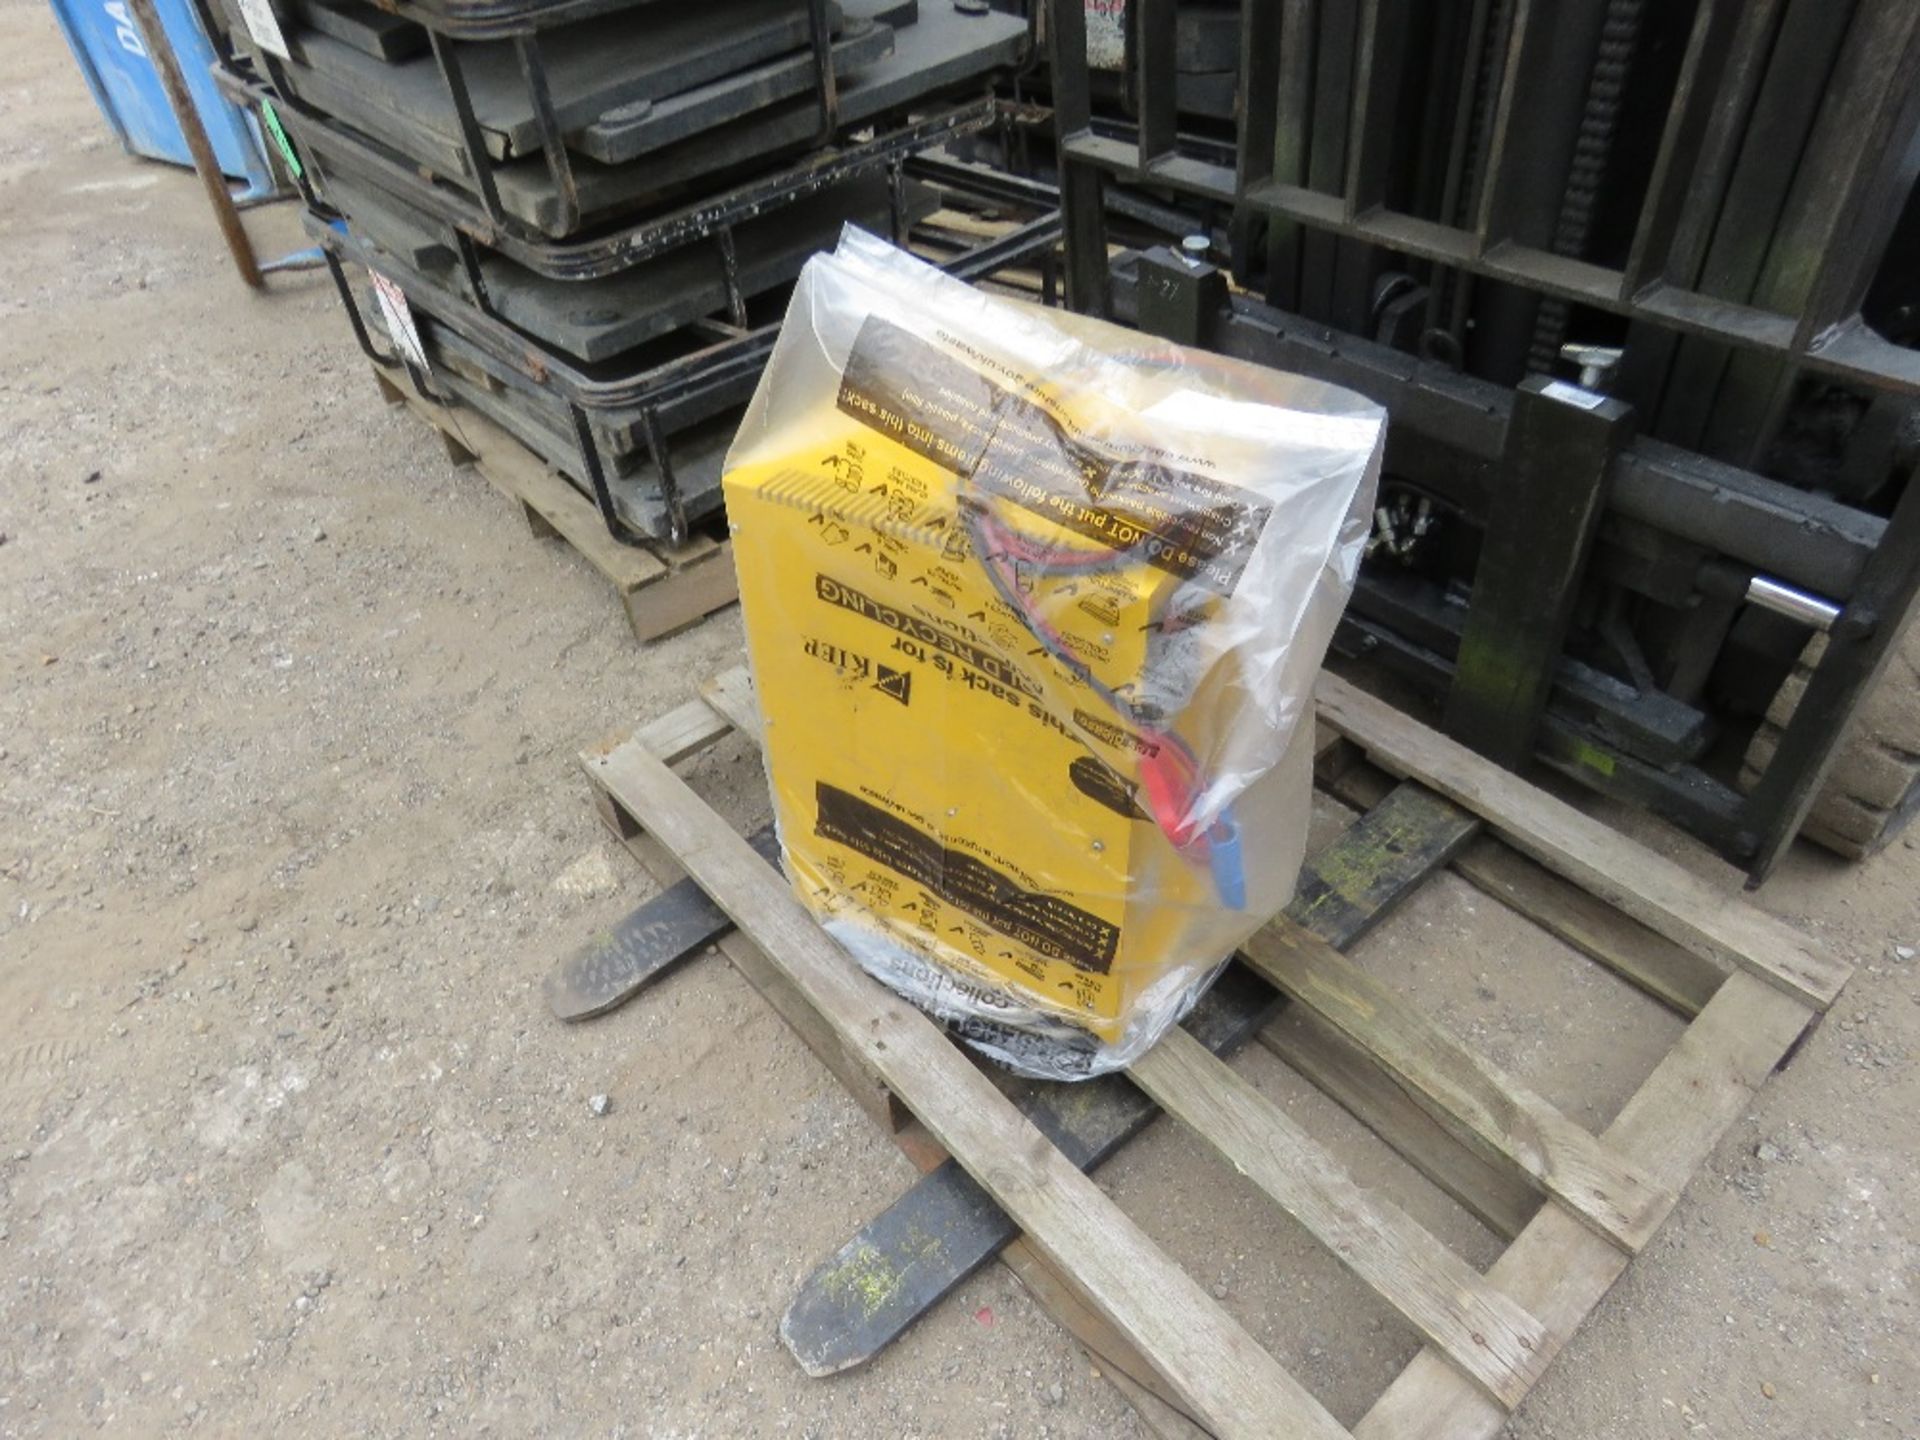 bidding increment now £100 DAEWOO BST15T-2 3 WHEEL BATTERY FORKLIFT WITH CHARGER. - Image 2 of 6